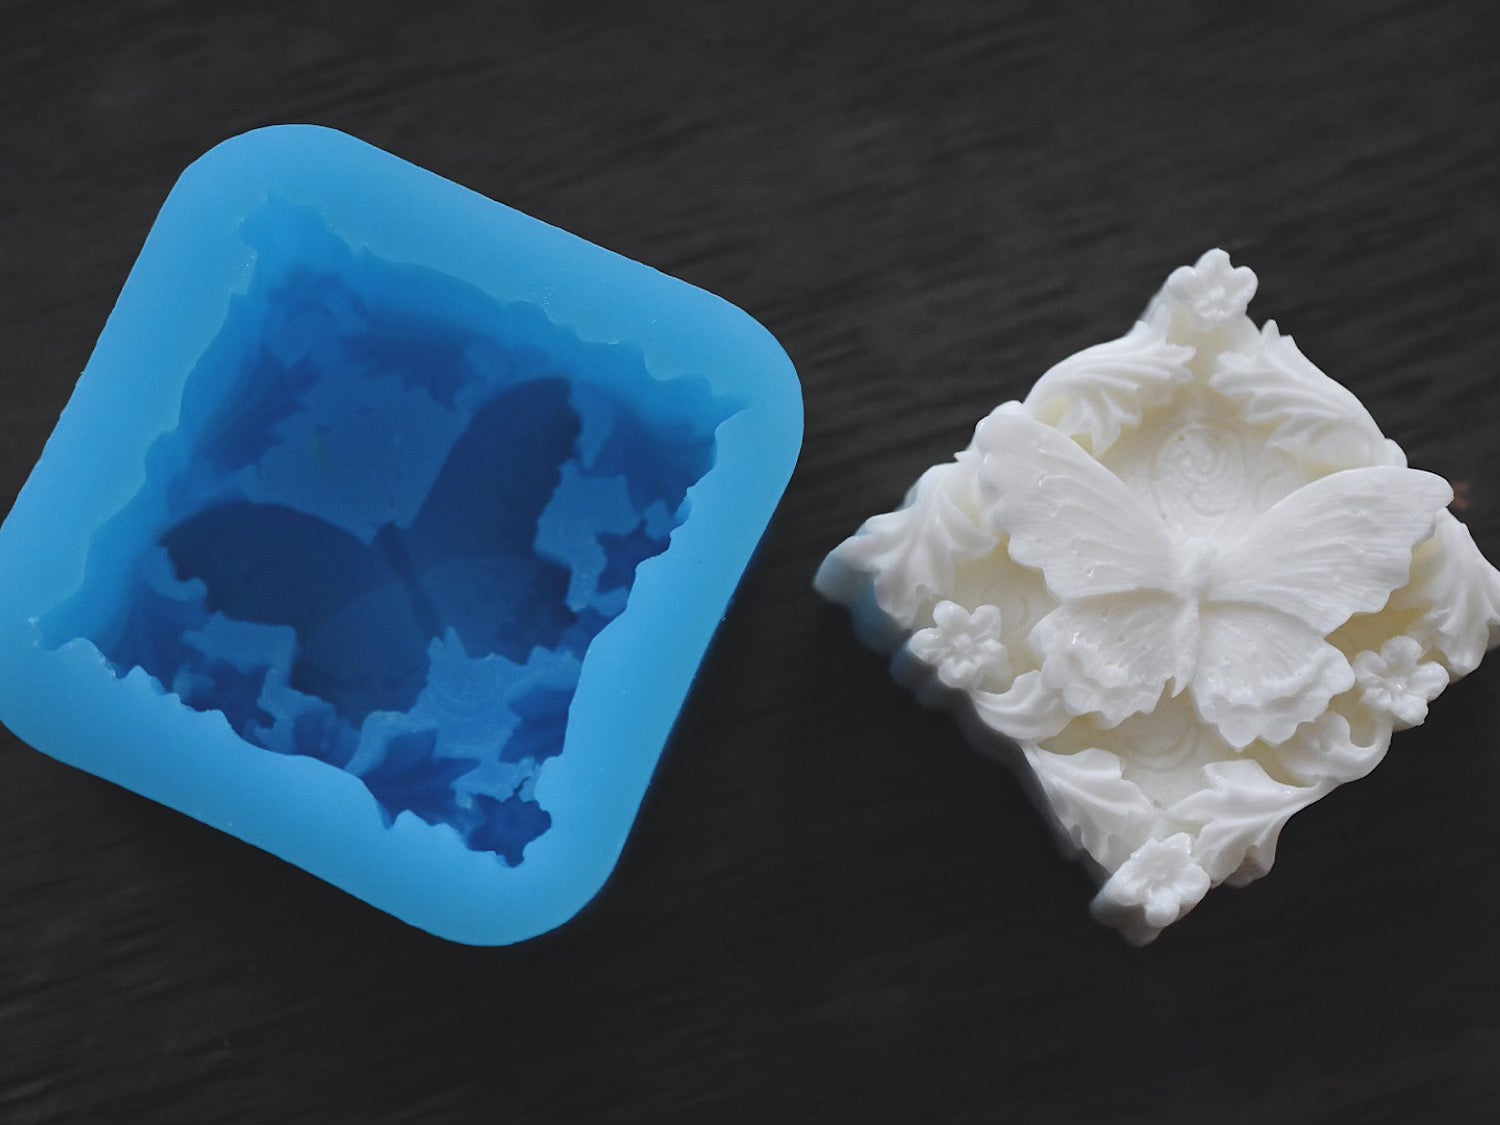 A square bar of soap with a butterfly and flower design sits next to the butterfly mold on a wooden surface. The bar of soap is white and the mold is blue.